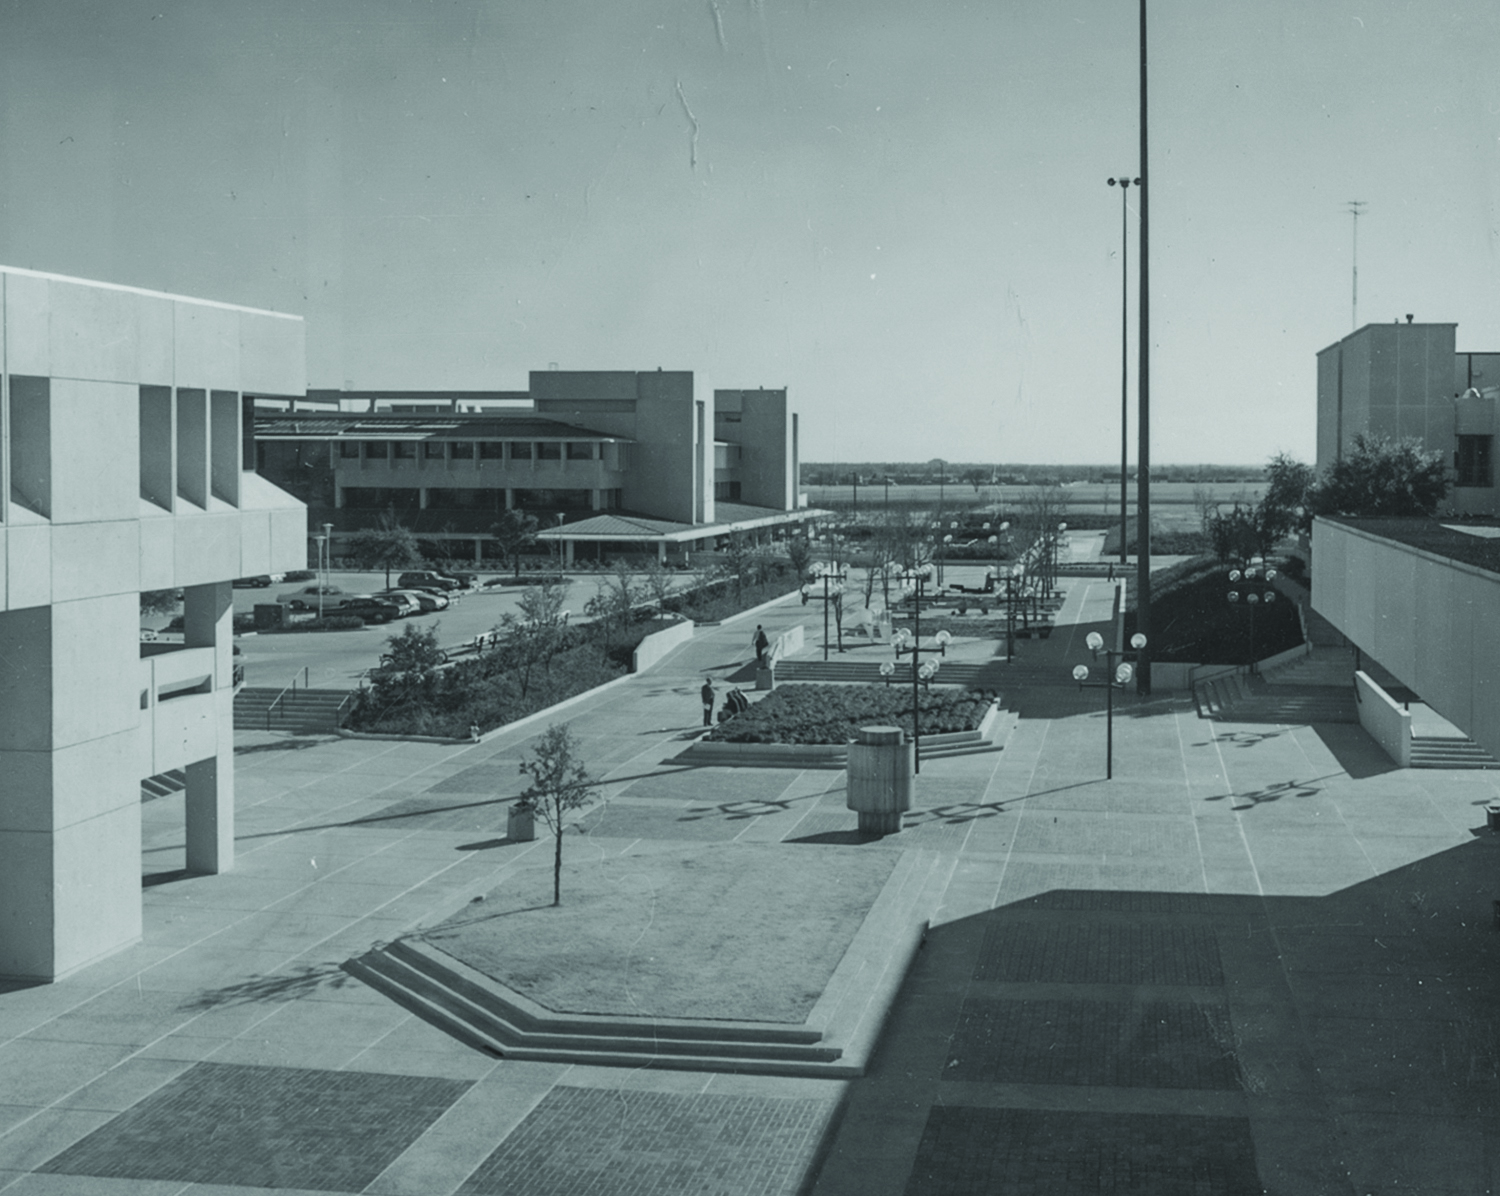 Black and white photo of the old, concrete campus mall